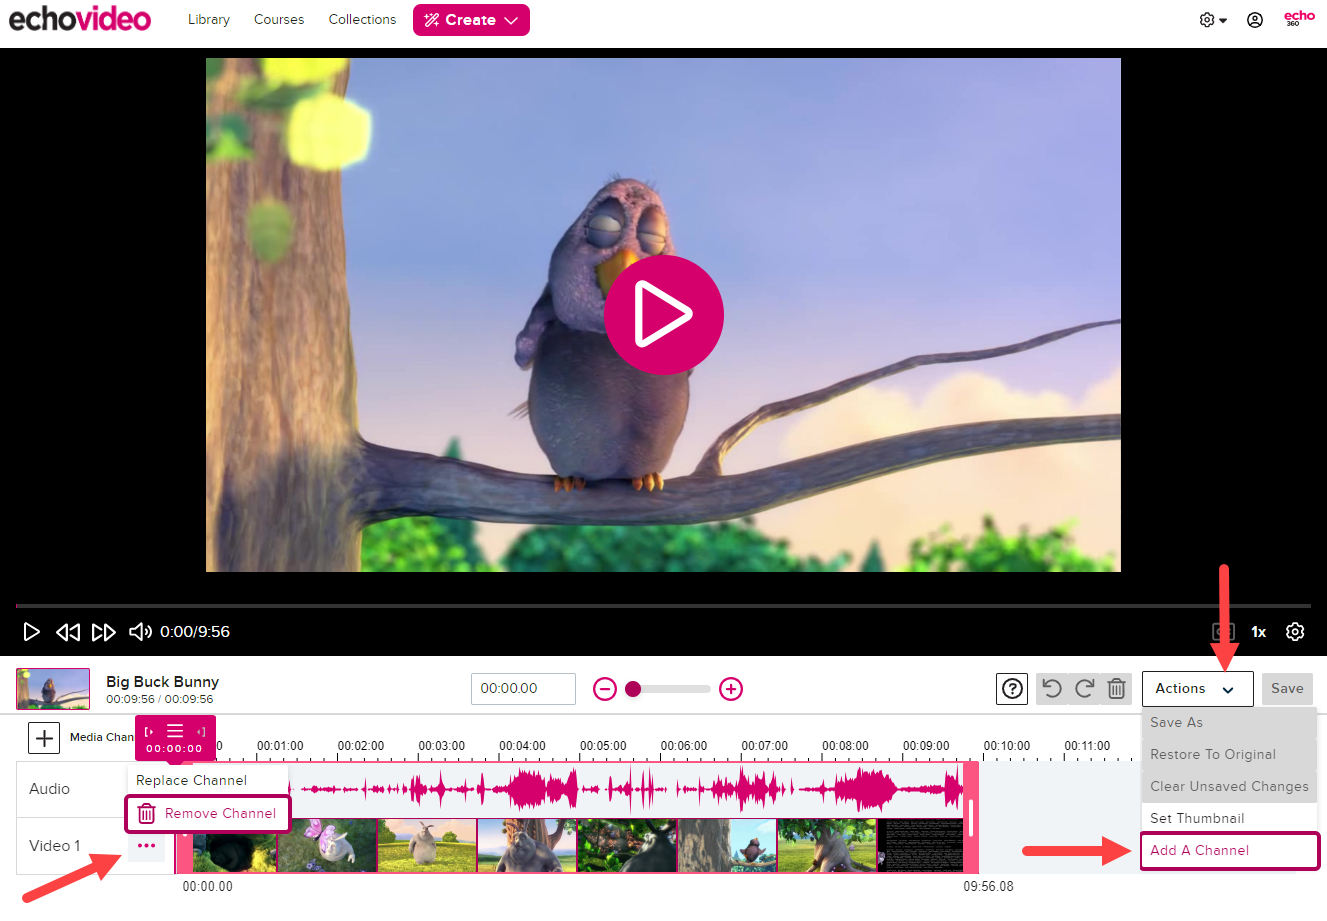 Composite image of the video editor with the Actions menu open showing the Add a Track command and the video 1 track menu open showing the Replace Track and Remove Track commands as described